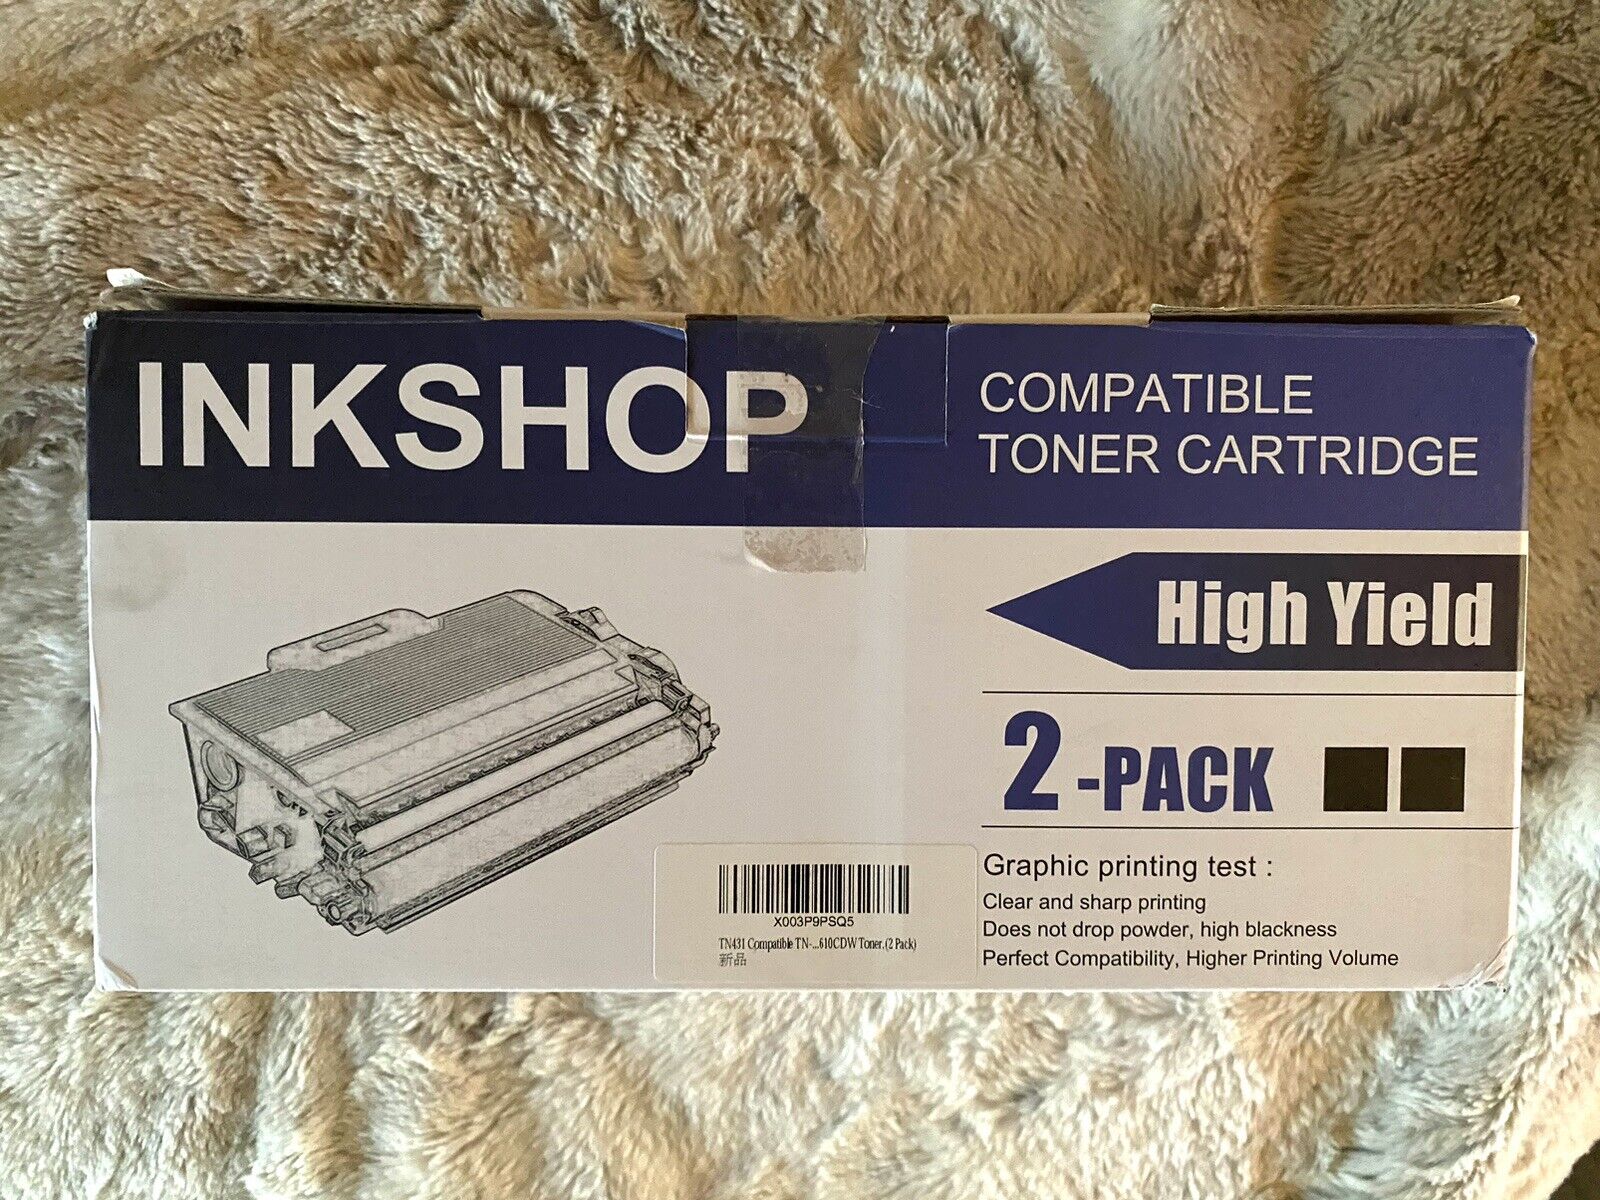 Ink Shop TN-431 Black High Yield Compatible Toner Cartridge 2 Pack New In Box